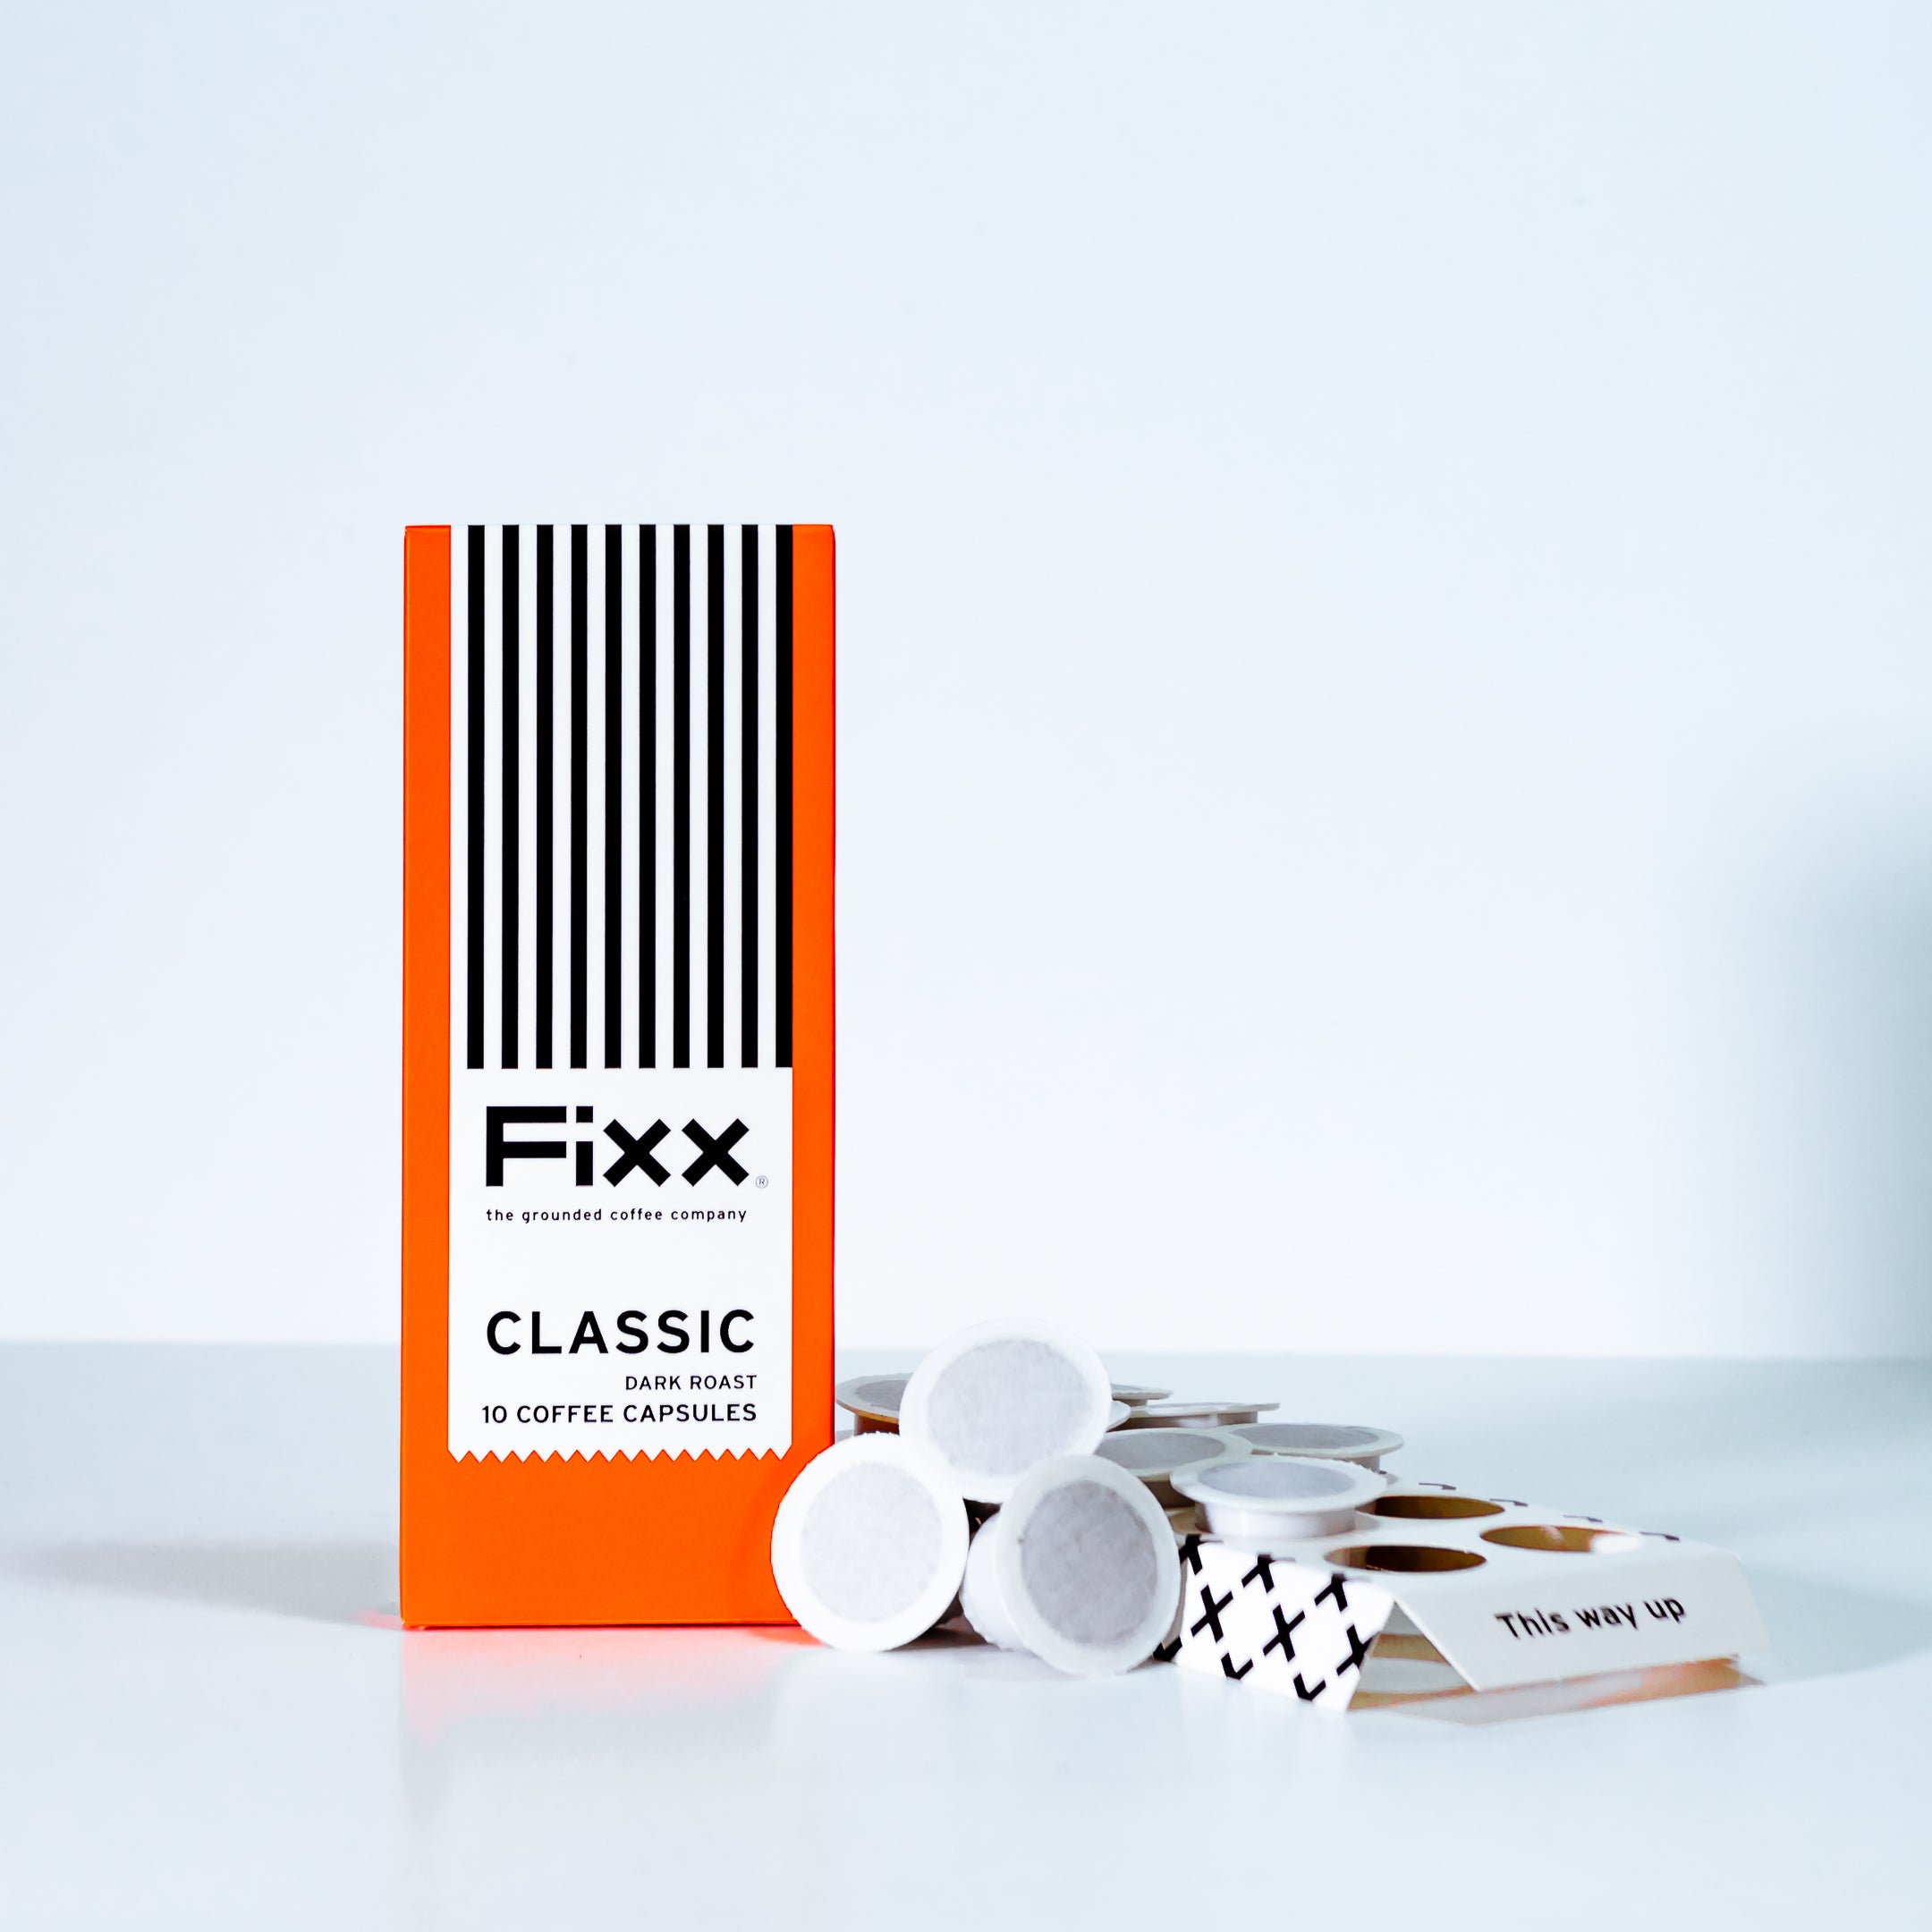 fixx classic coffee capsules and tray